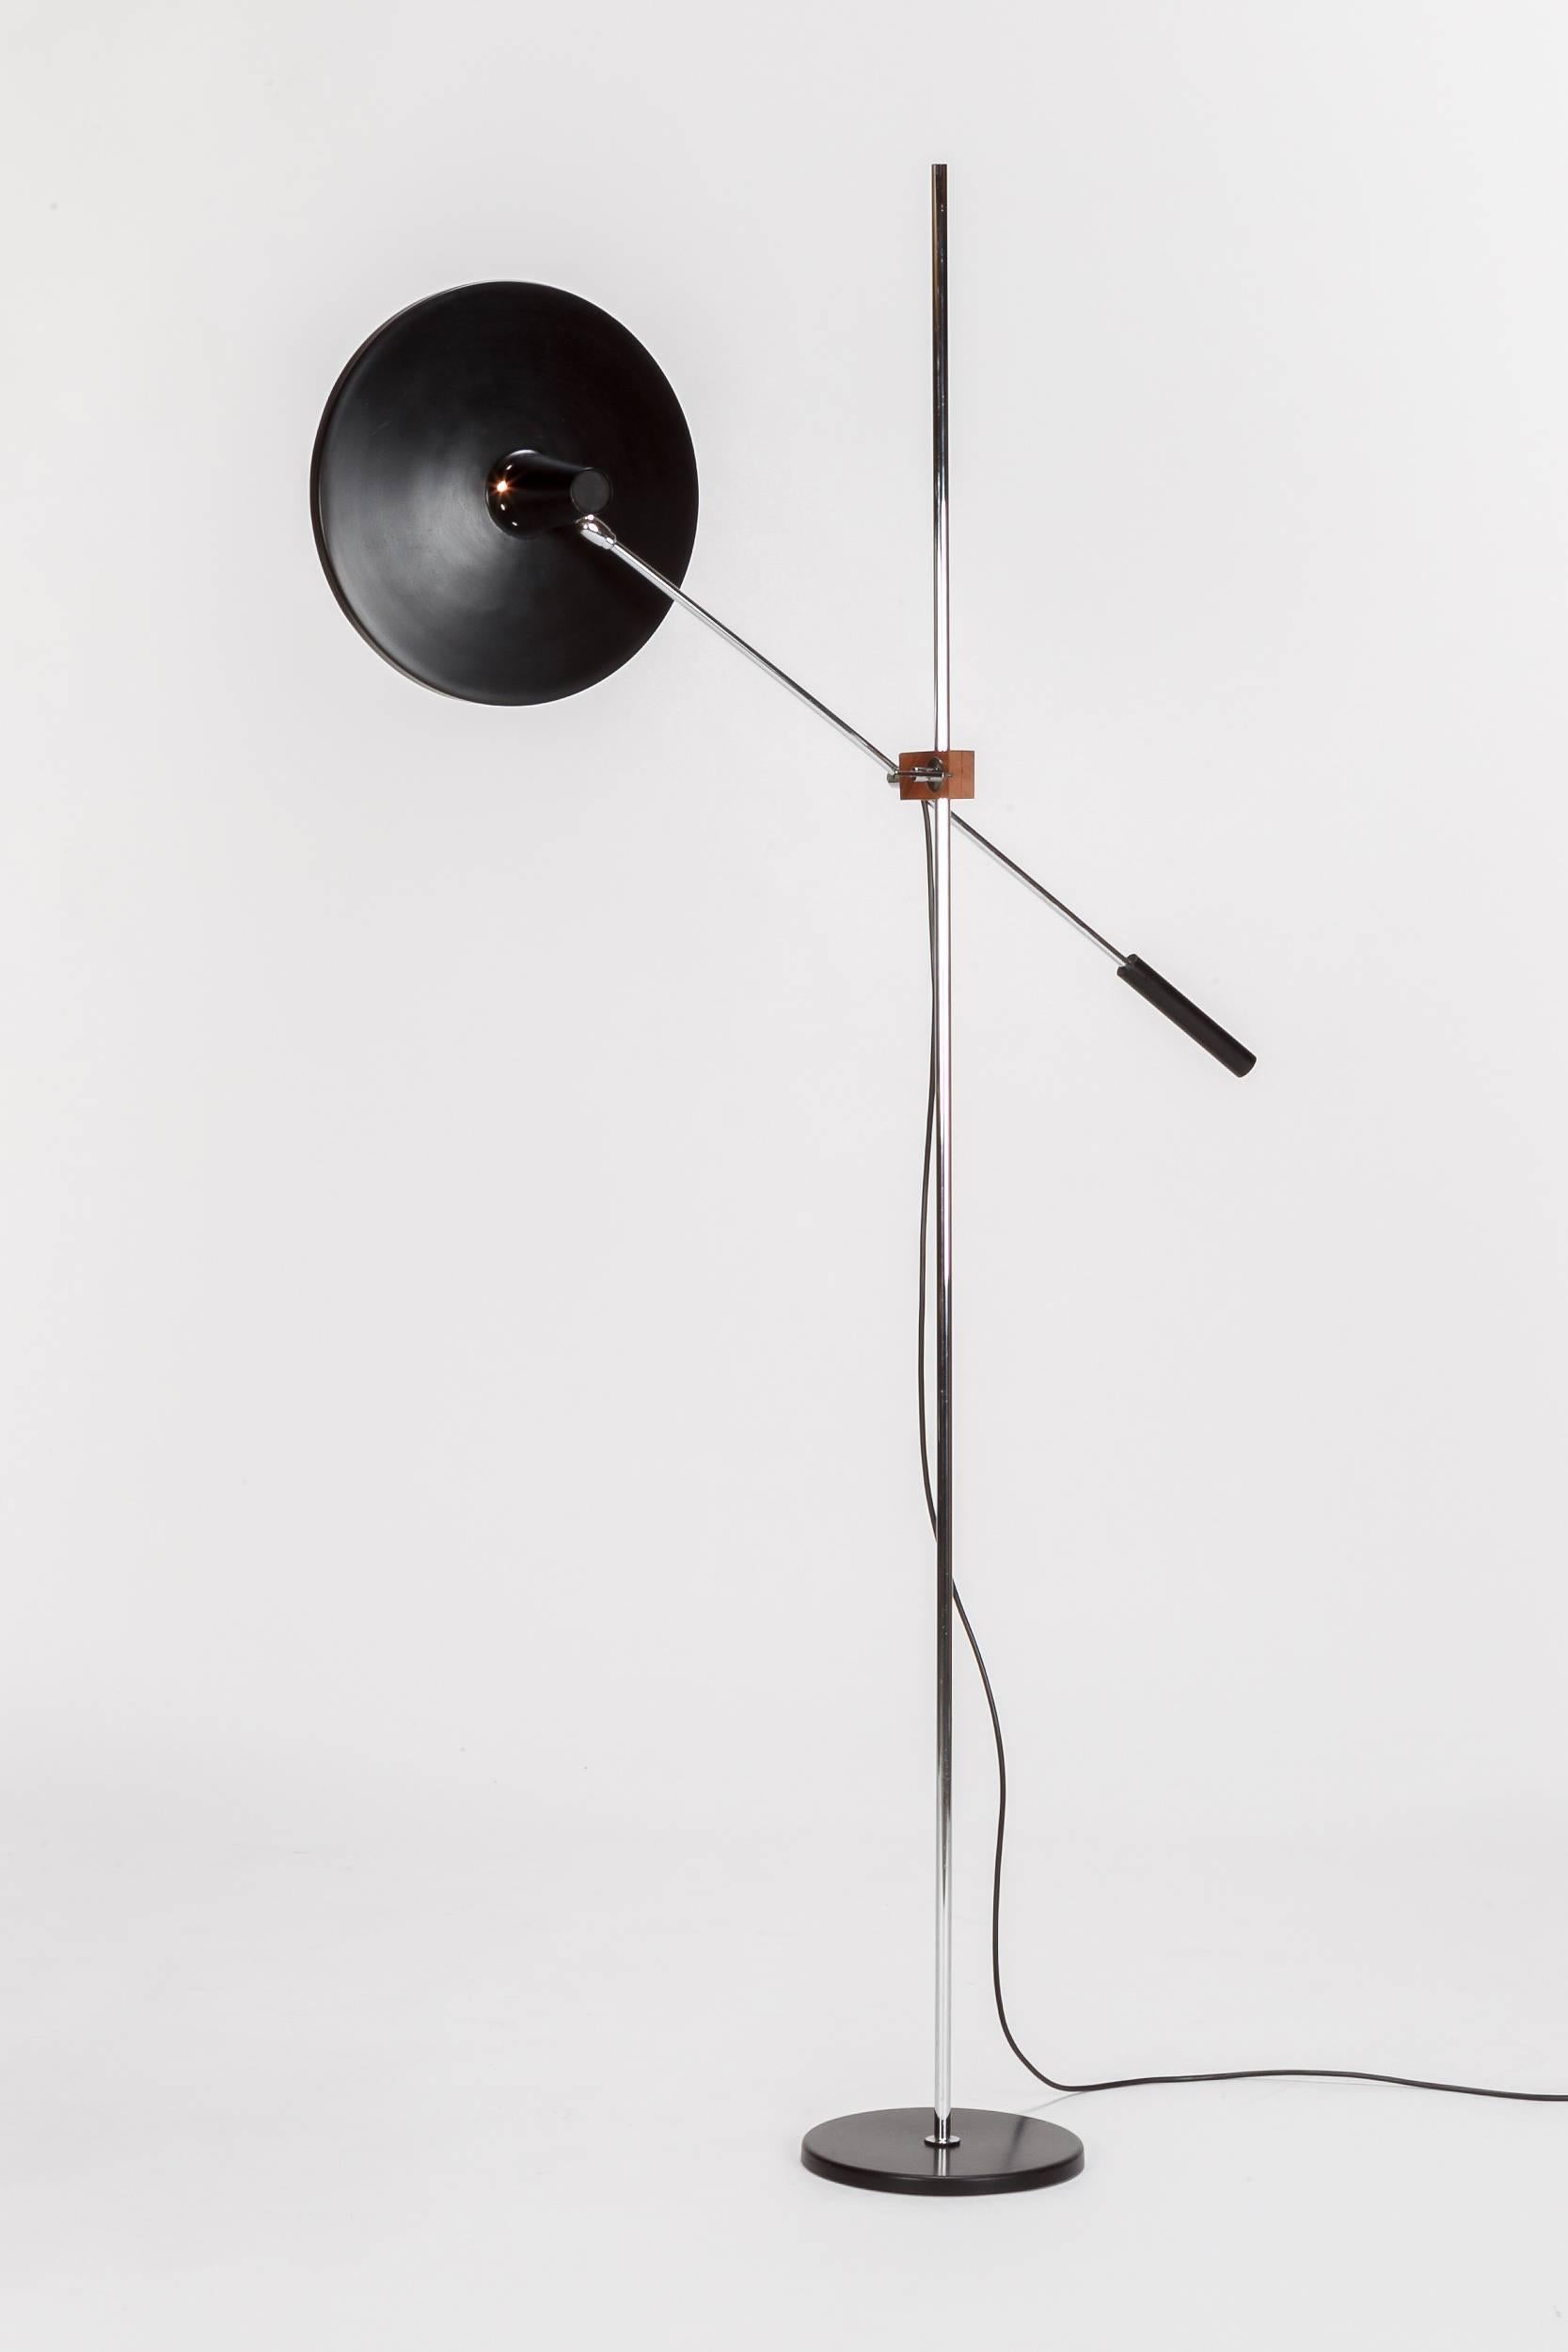 A stunning Swiss floor lamp in the manner of the famous Rico & Rosemarie Baltensweiler lamp, this model was manufactured in the 1960s in Switzerland. Adjustable in height with a wooden walnut clasp. Very well-propotioned as well as practical.